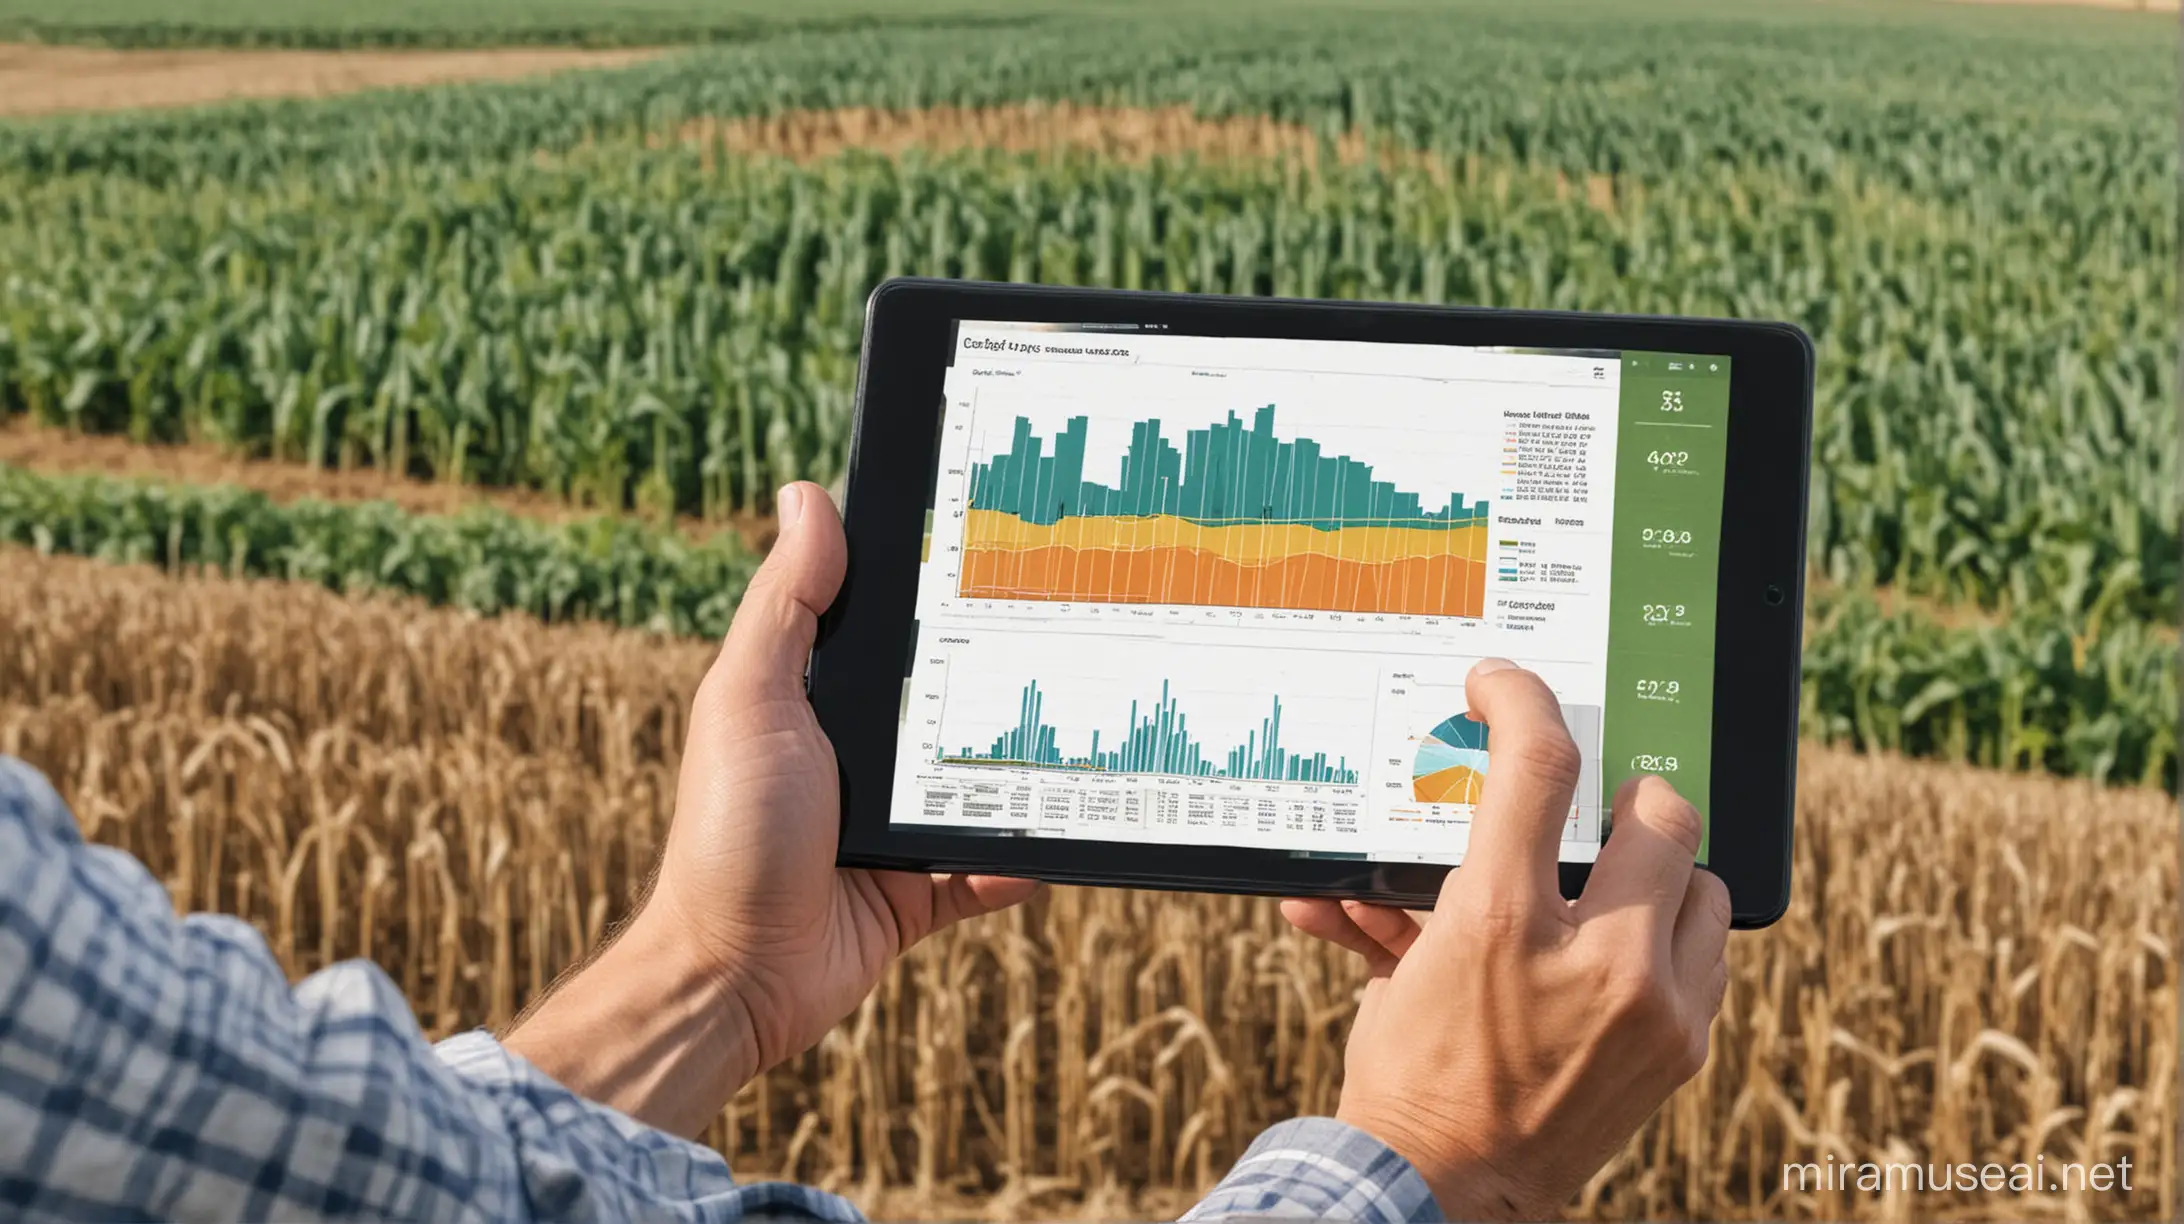 Man Analyzing Agricultural Data on Tablet in Farm Setting